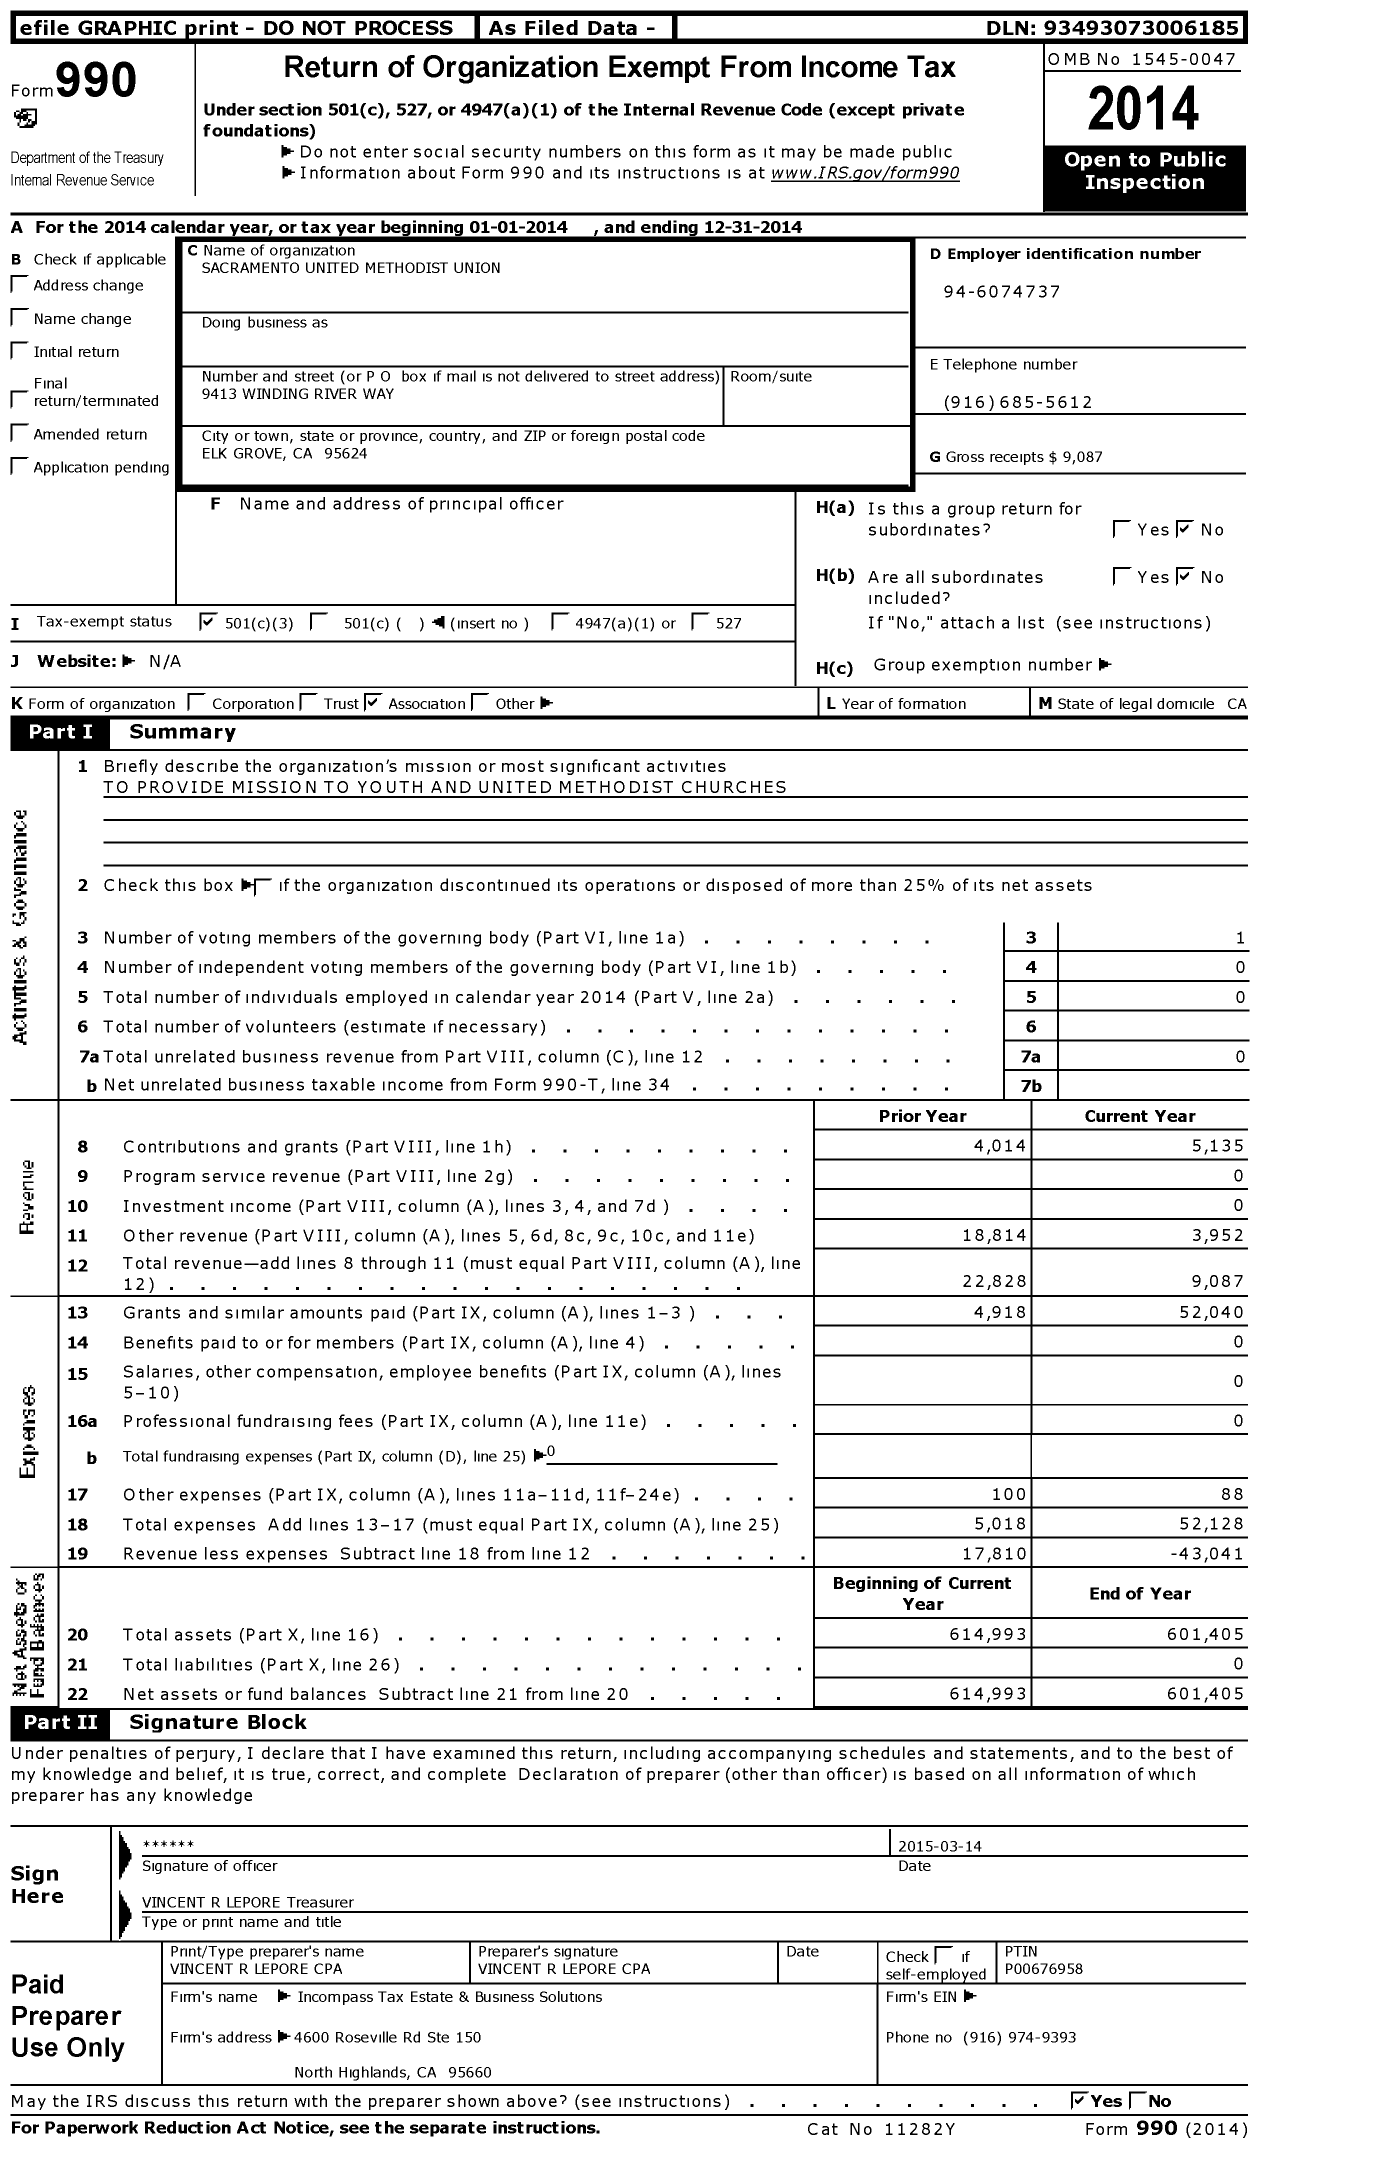 Image of first page of 2014 Form 990 for The Sacramento United Methodist Union